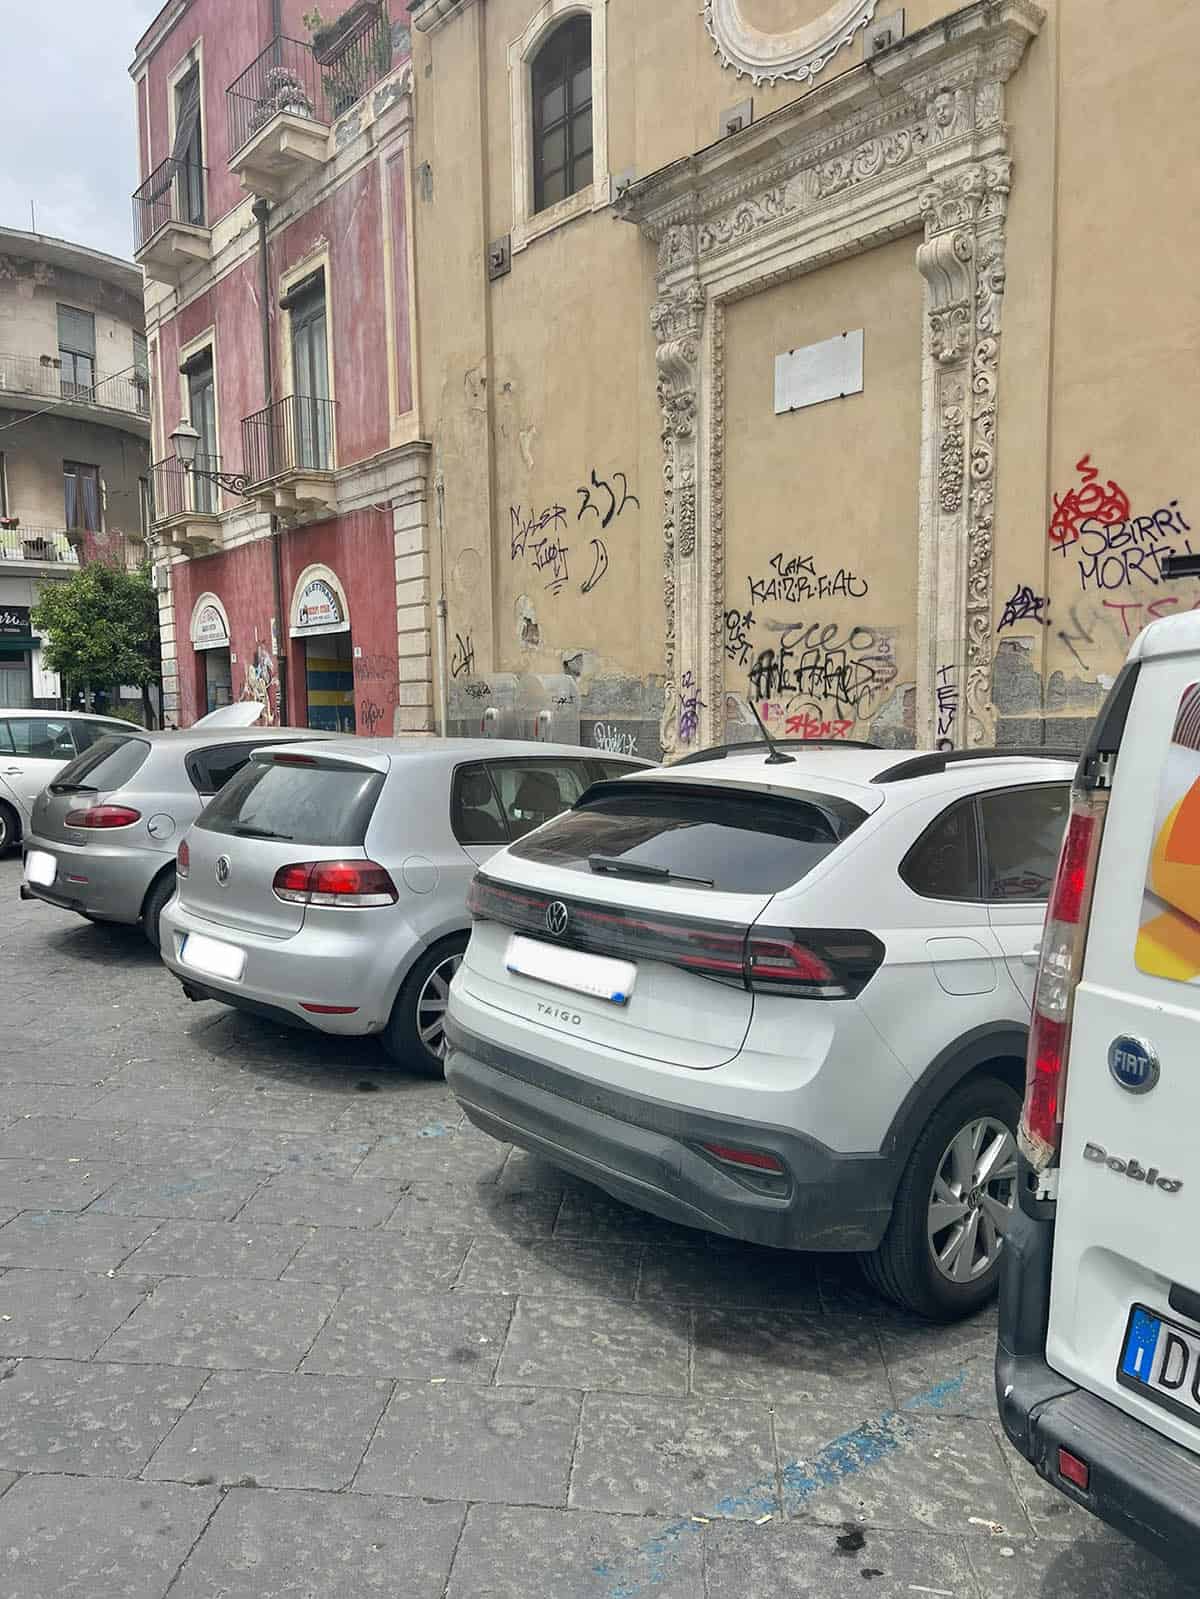 An image of cars parked in Sicily